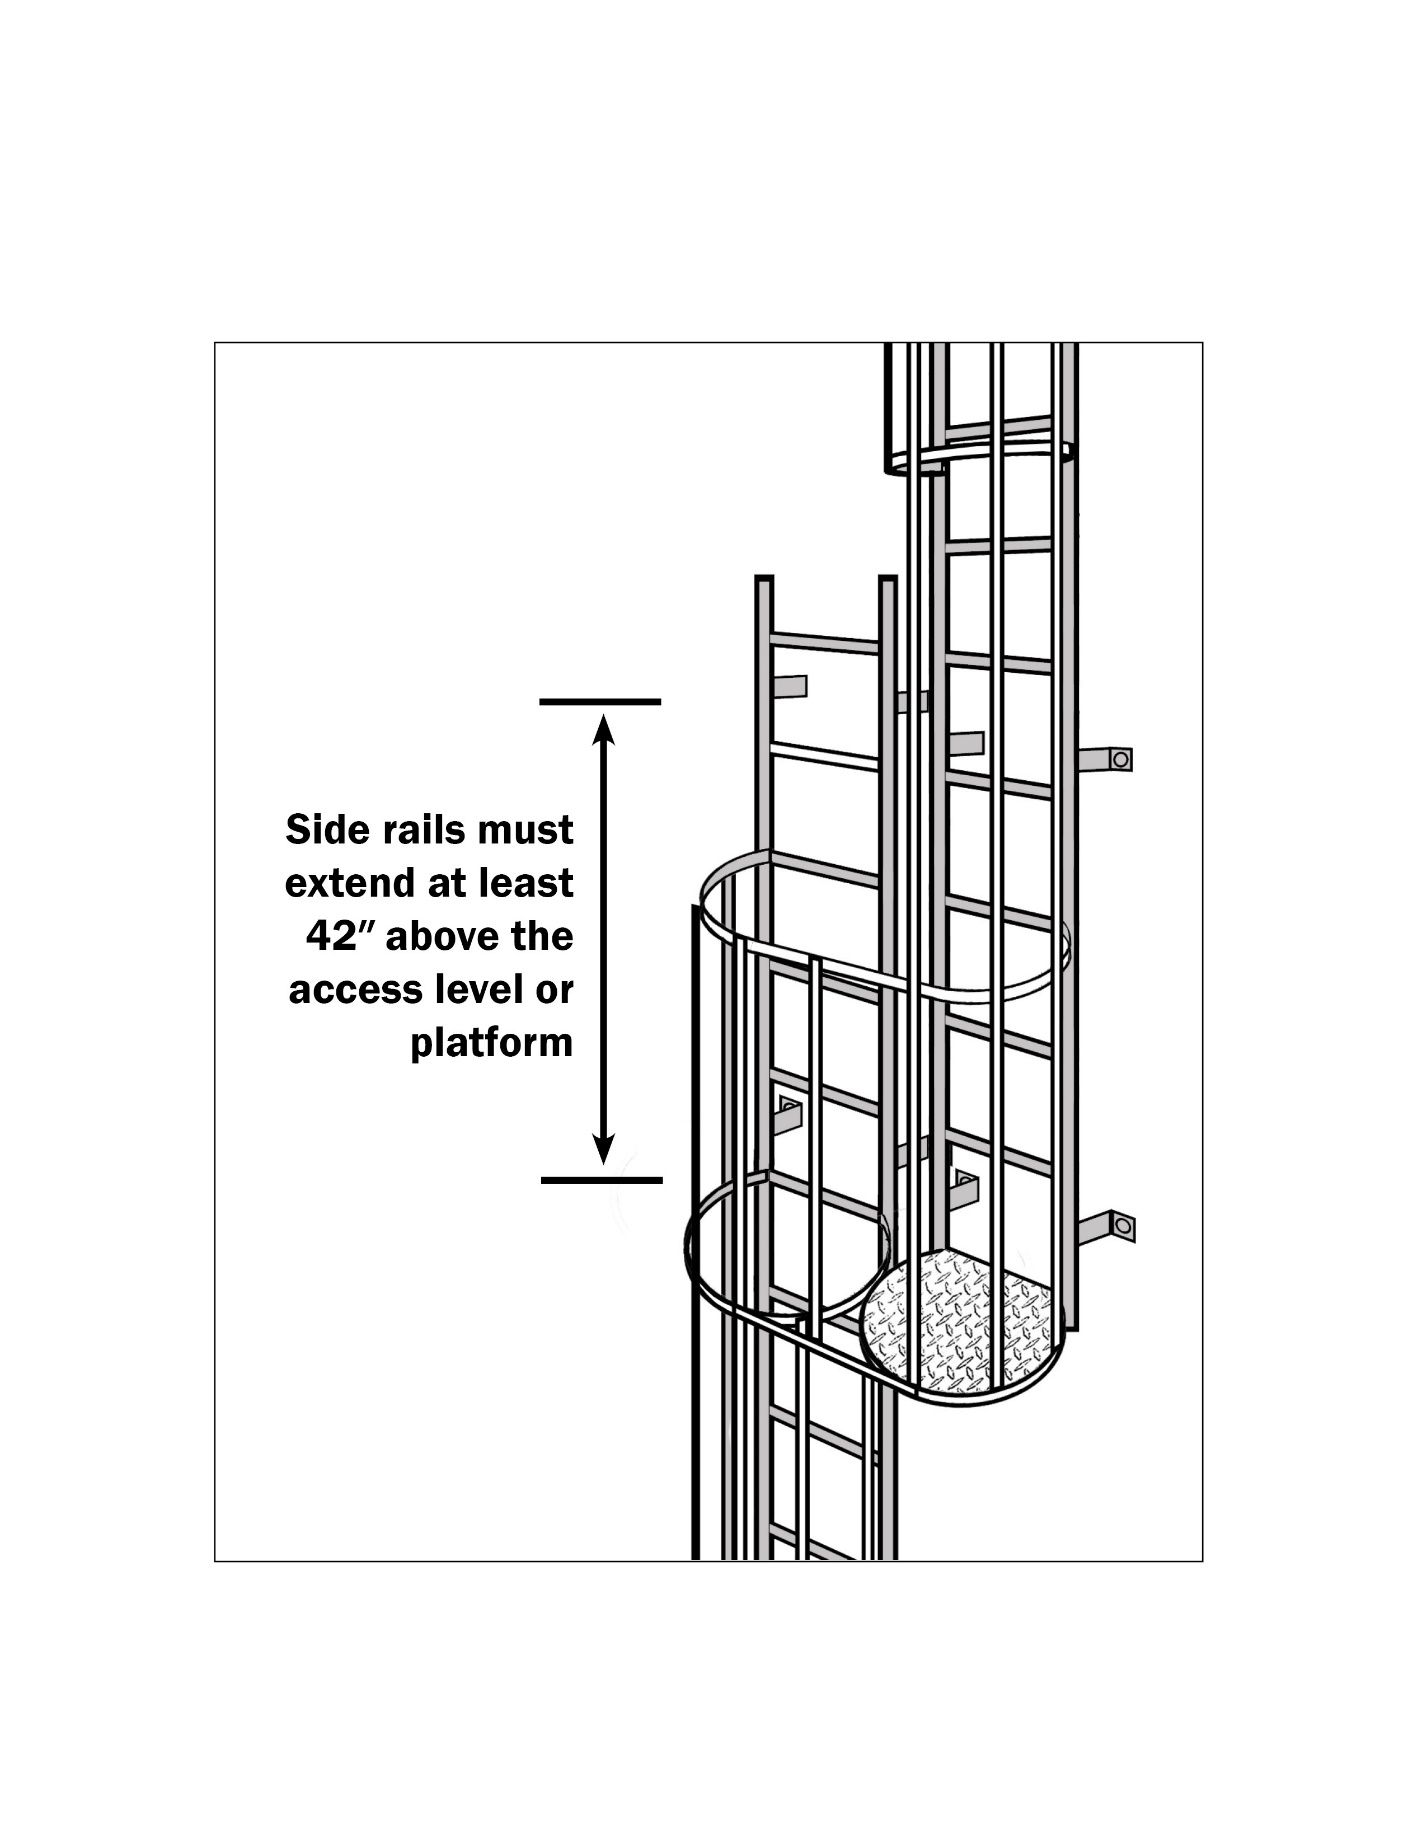 Side-step ladders must provide continuous protection to the climber while stepping onto the adjacent platform or access level. 